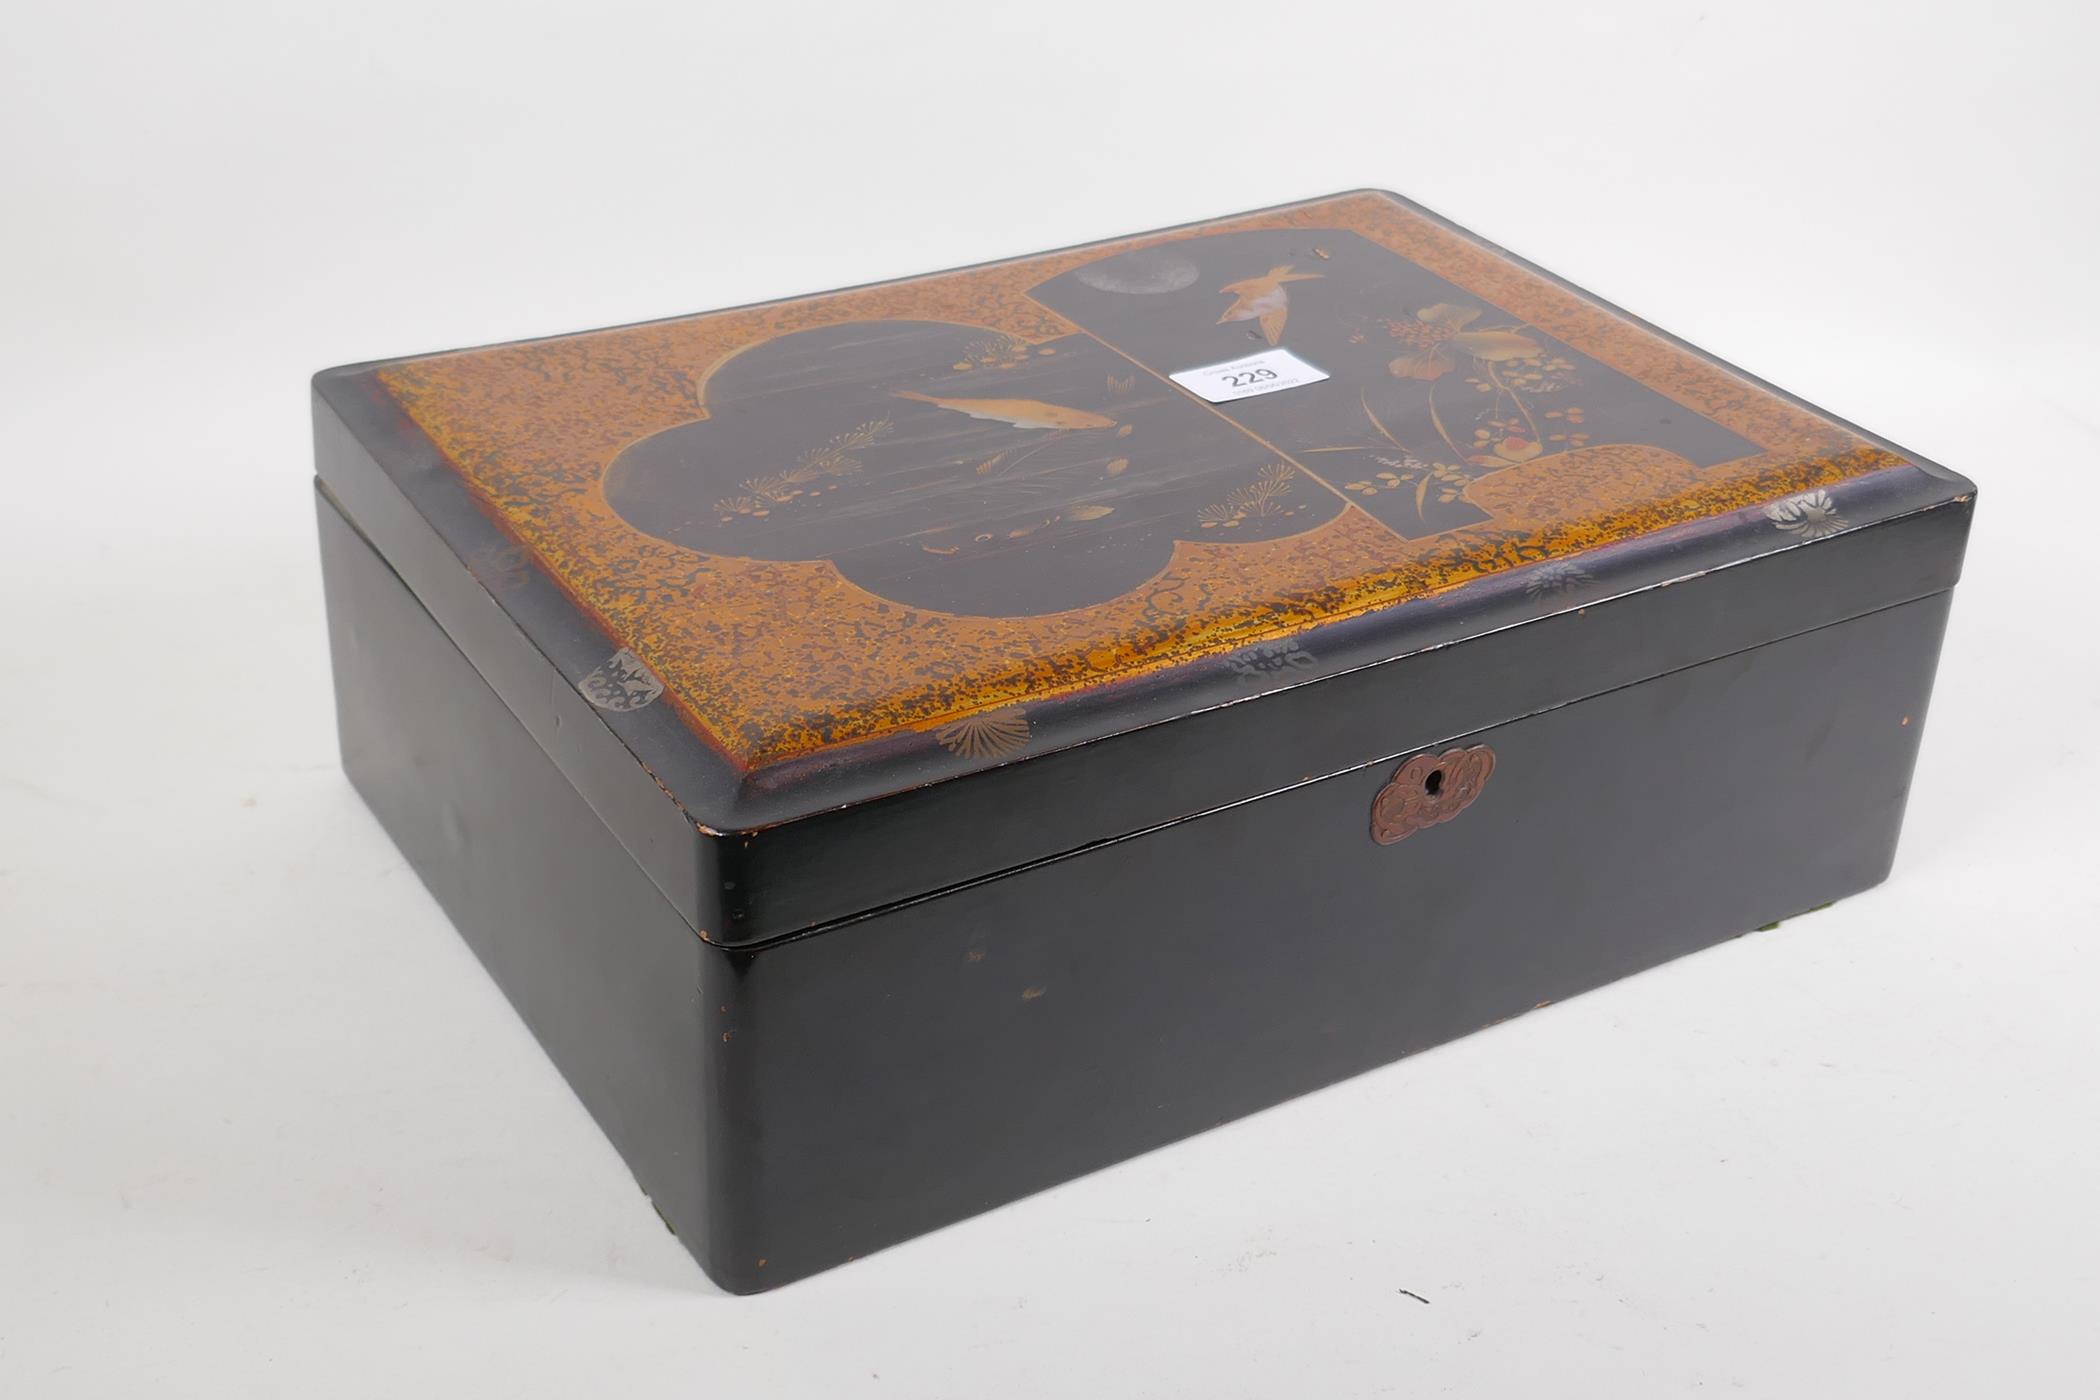 A Meiji lacquer box with gilt decoration of carp and a birds in a moonlit sky, 36 x 26 x 13 cm - Image 2 of 4